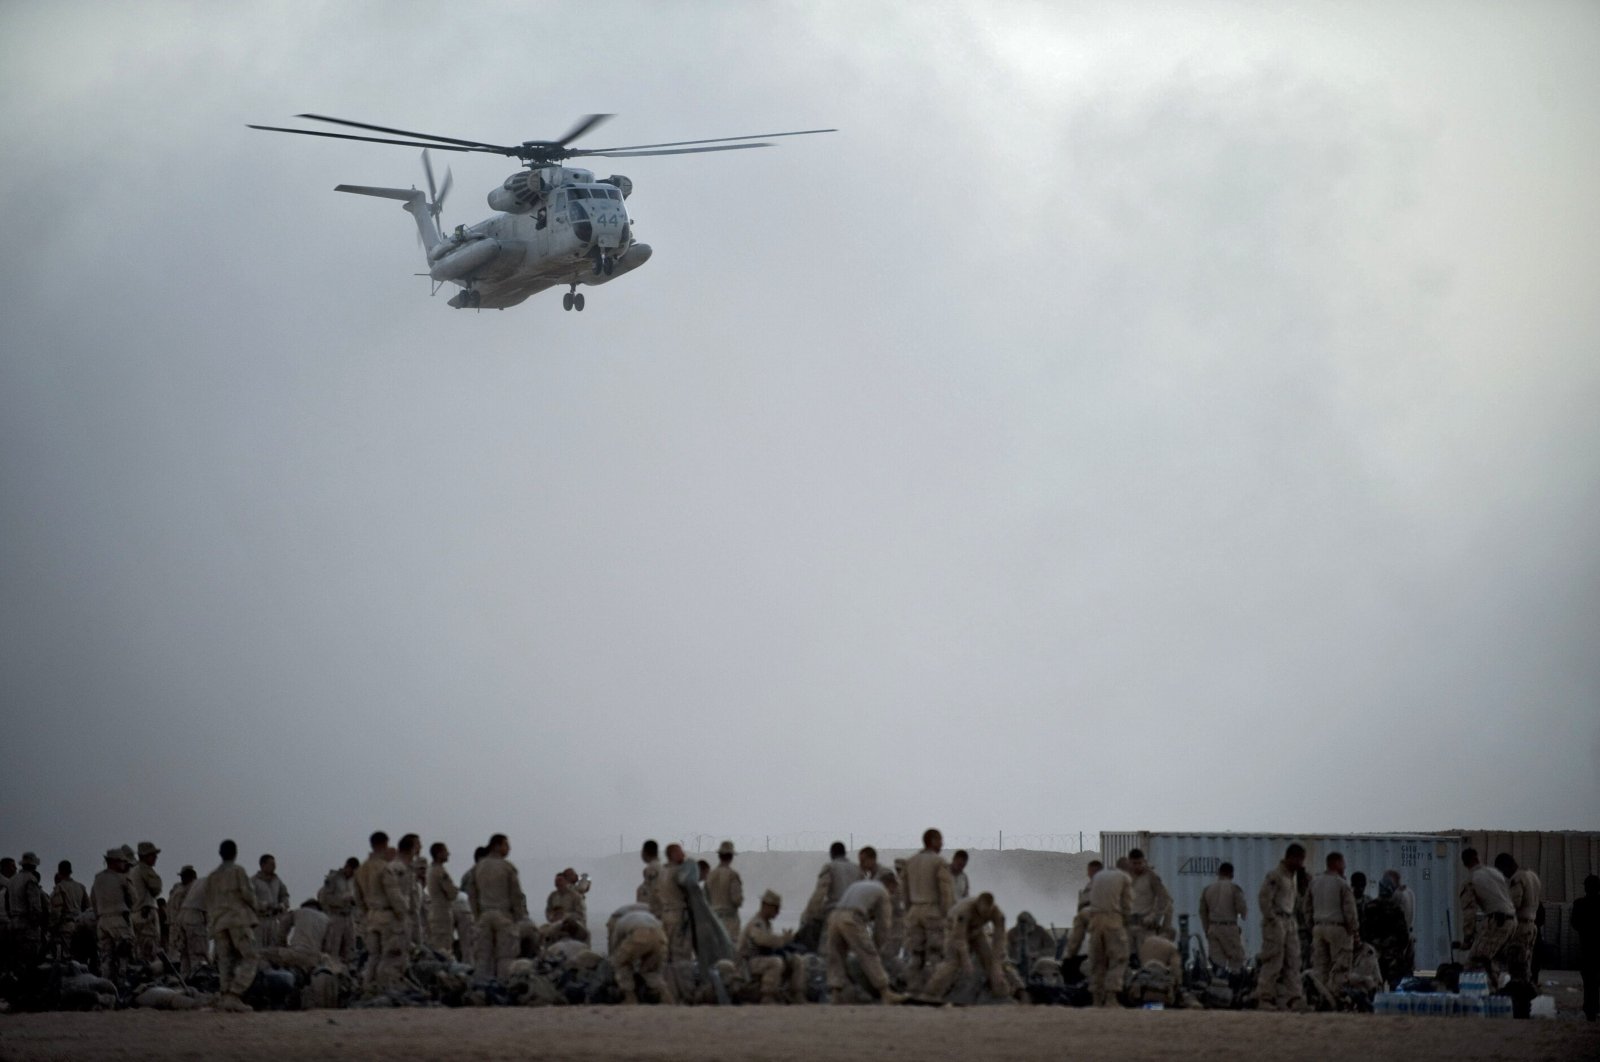 U.S. Marines from the 2nd Battalion, 8th Marine Regiment of the 2nd Marine Expeditionary Brigade, wait as a helicopter arrives to airlift them for Operation Khanjar at Camp Dwyer in Helmand Province, Afghanistan, July 2, 2009. (AFP Photo)